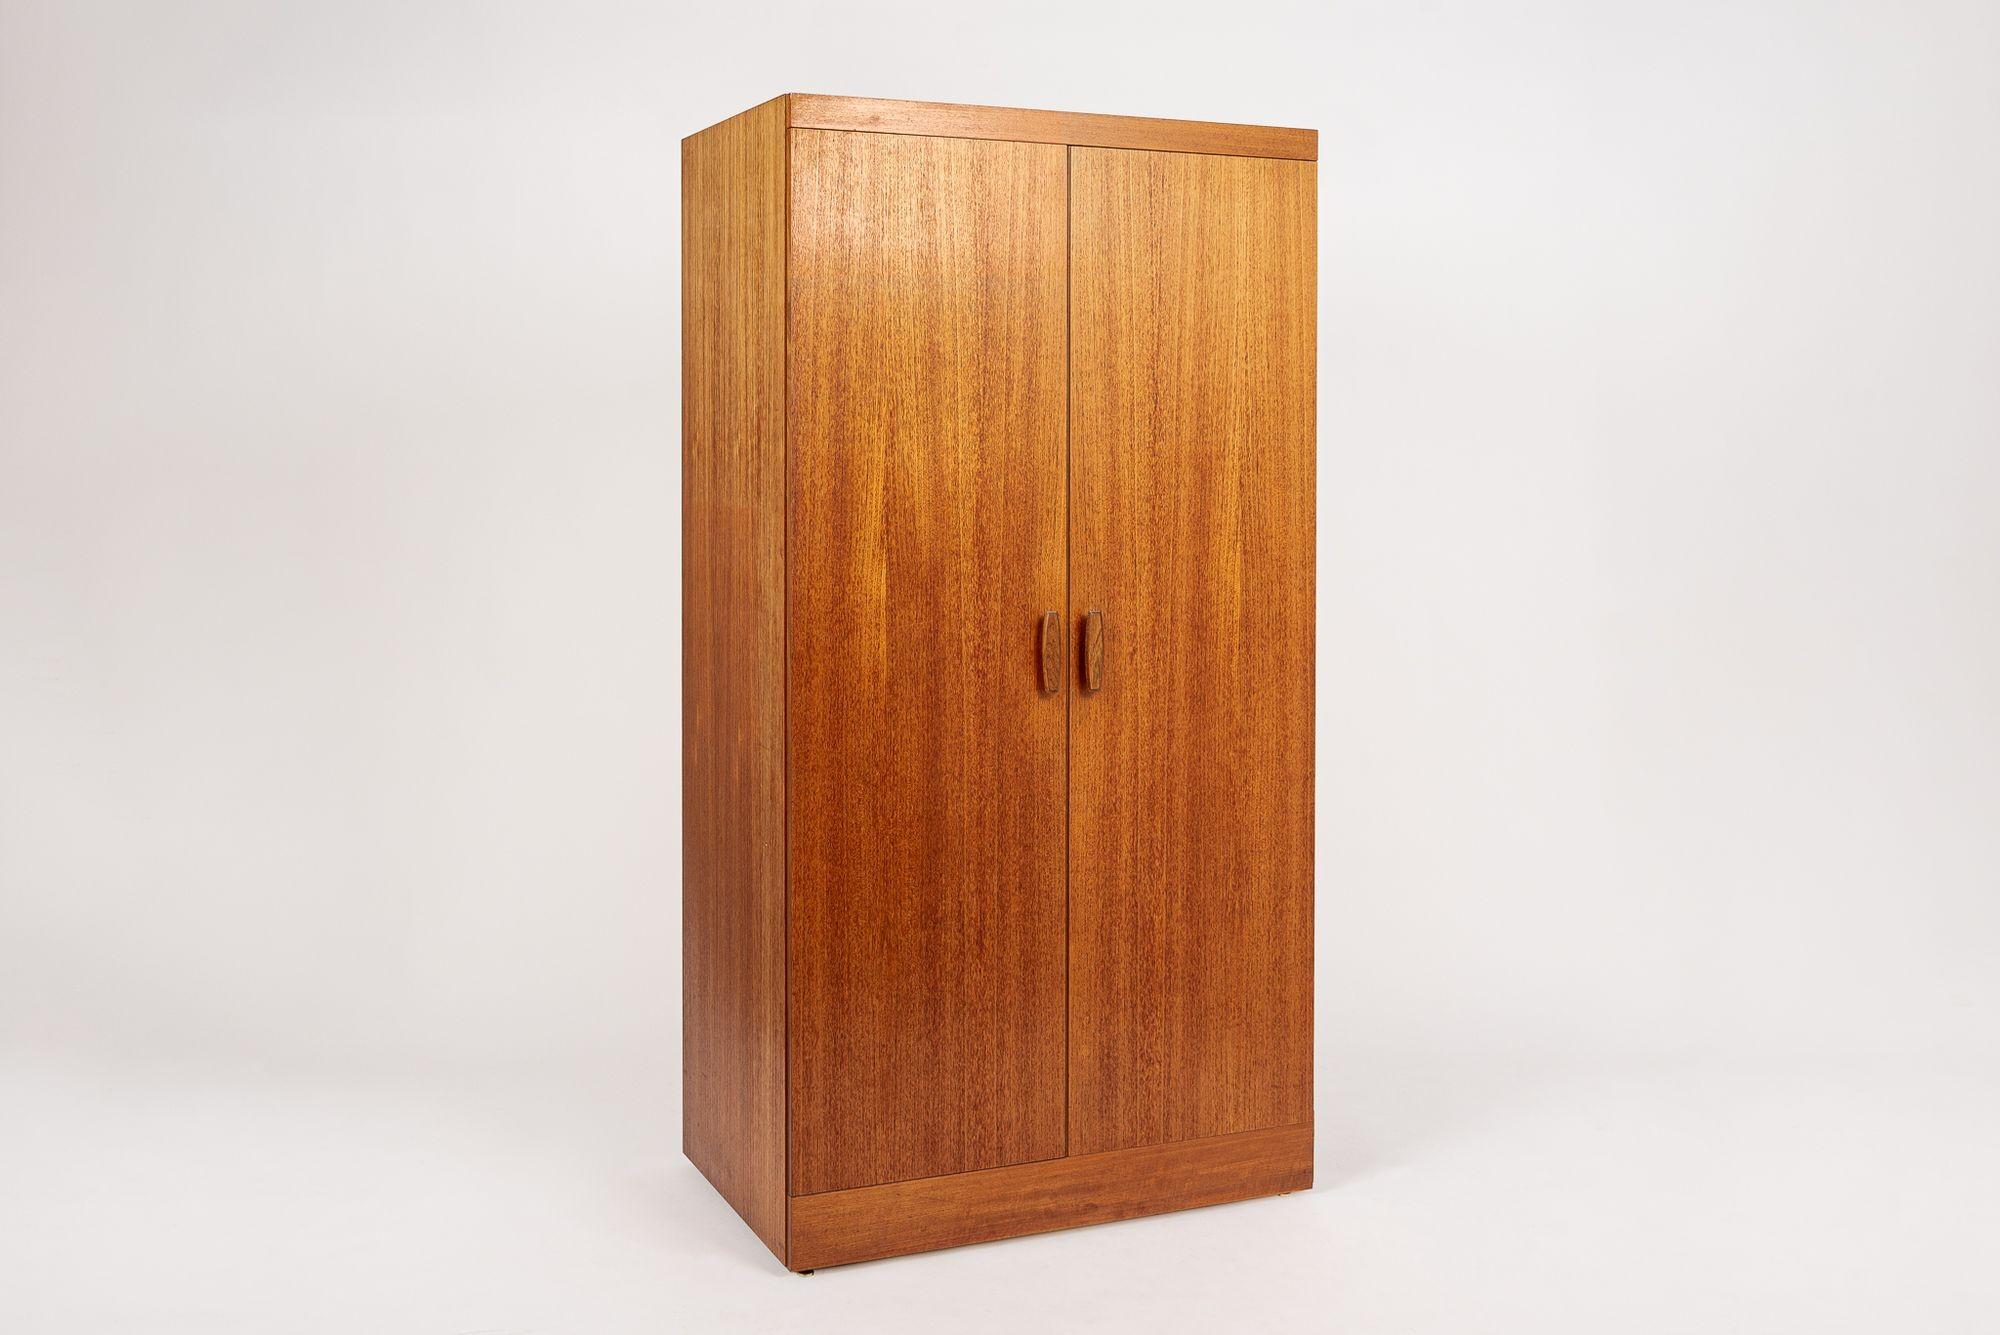 This vintage mid century modern teak wood wardrobe or armoire closet cabinet was made by G-Plan in Great Britain circa 1960. The center double doors open on spacious storage with one hanging rod across the top. This versatile, free-standing wardrobe